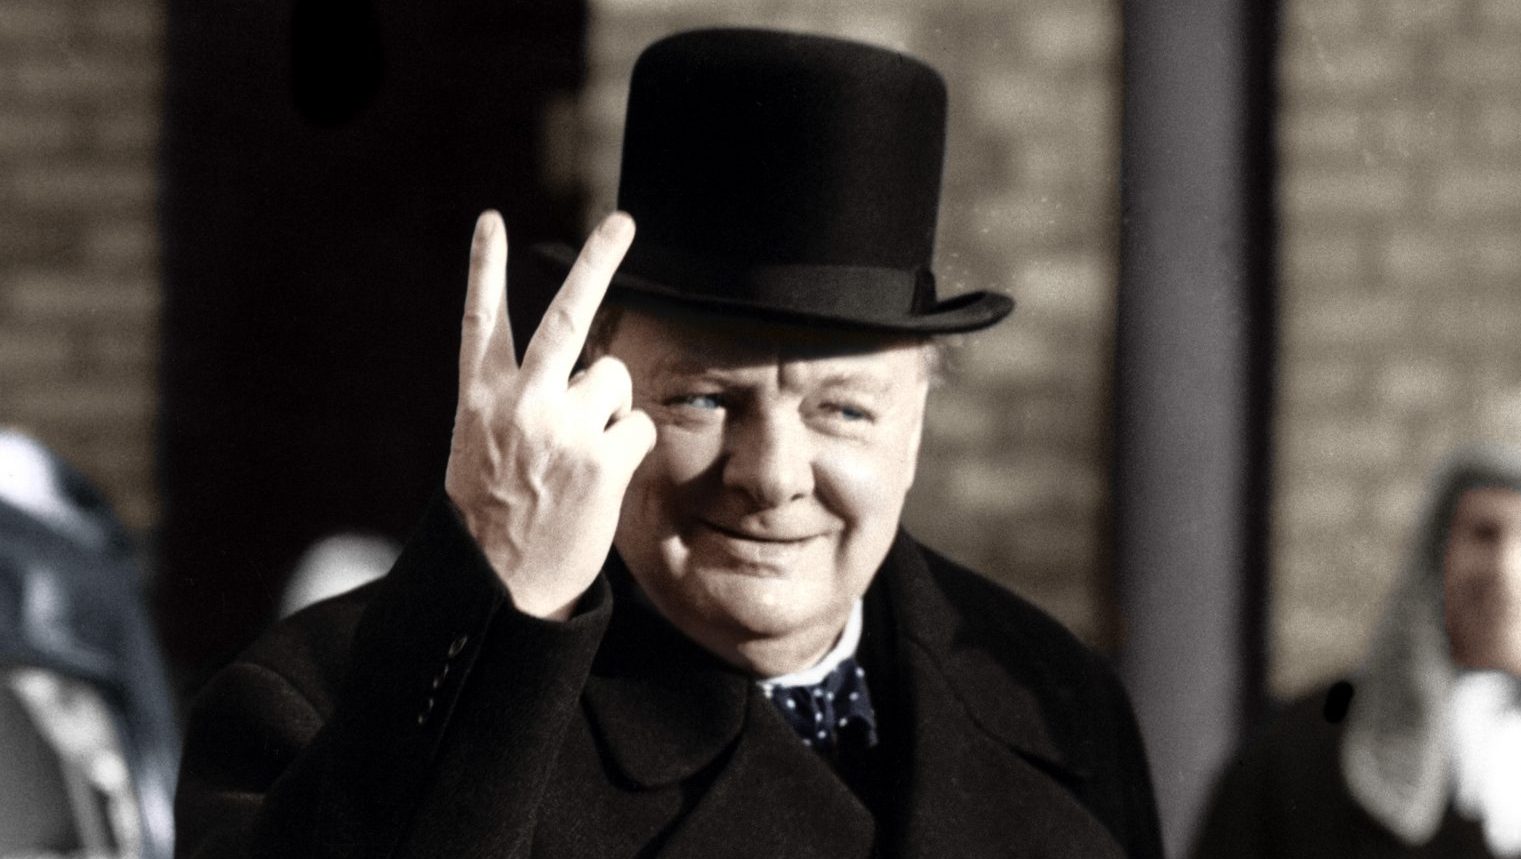 Winston Churchill making a reversed version of his famous V for Victory sign, 1942. In spite of being warned by staff that the gesture had another significance when performed with his palm facing inwards, the PM sometimes continued to make it that way, claiming it was an “up yours” to the Nazis. Photo: The Print Collector/Getty